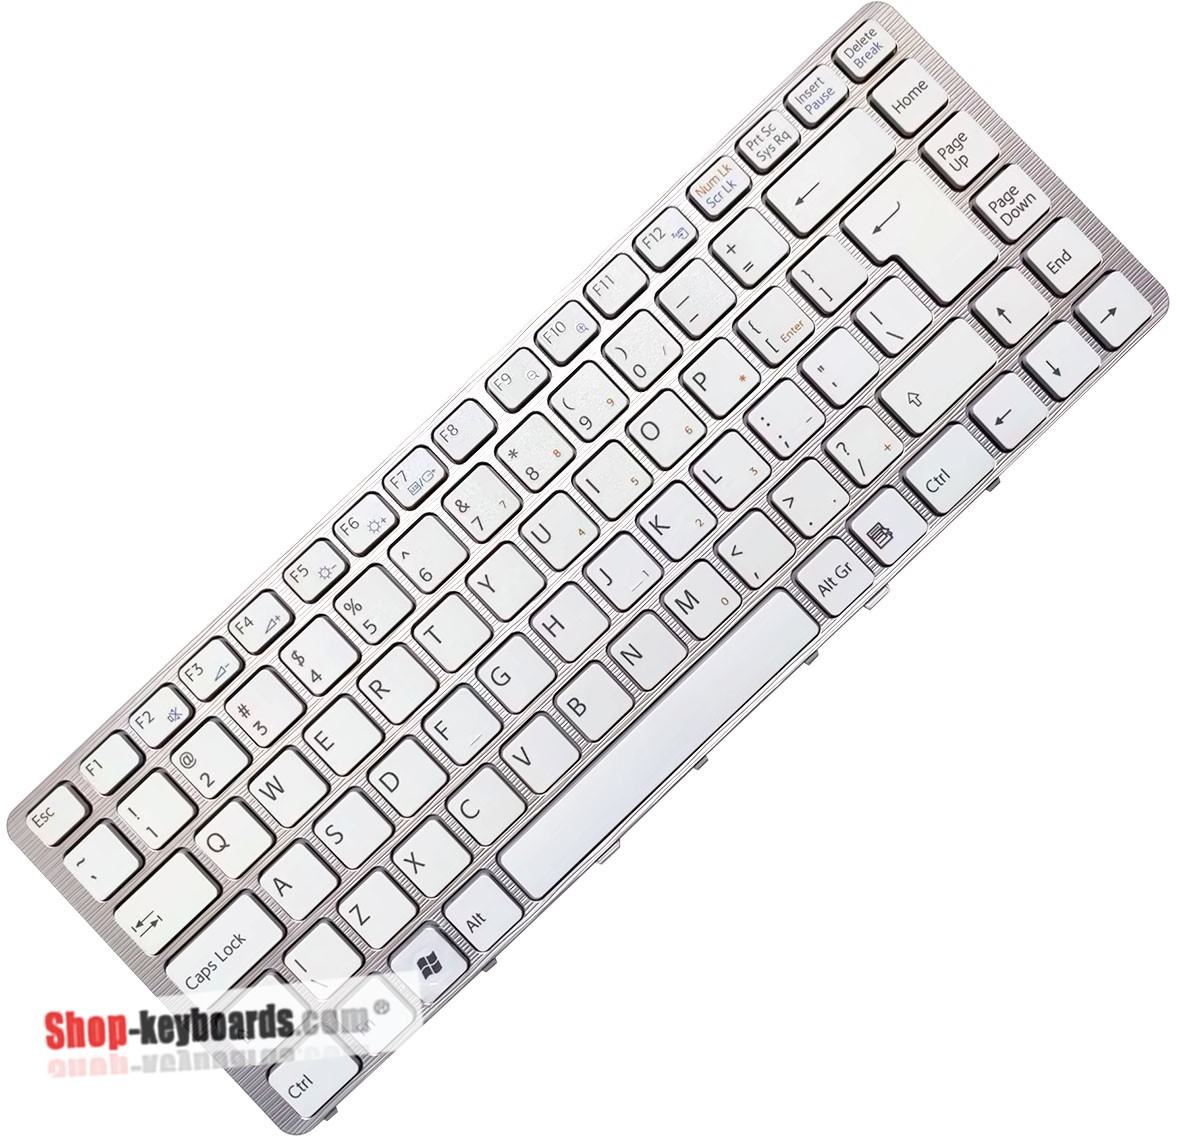 Sony 1-487-643-41 Keyboard replacement